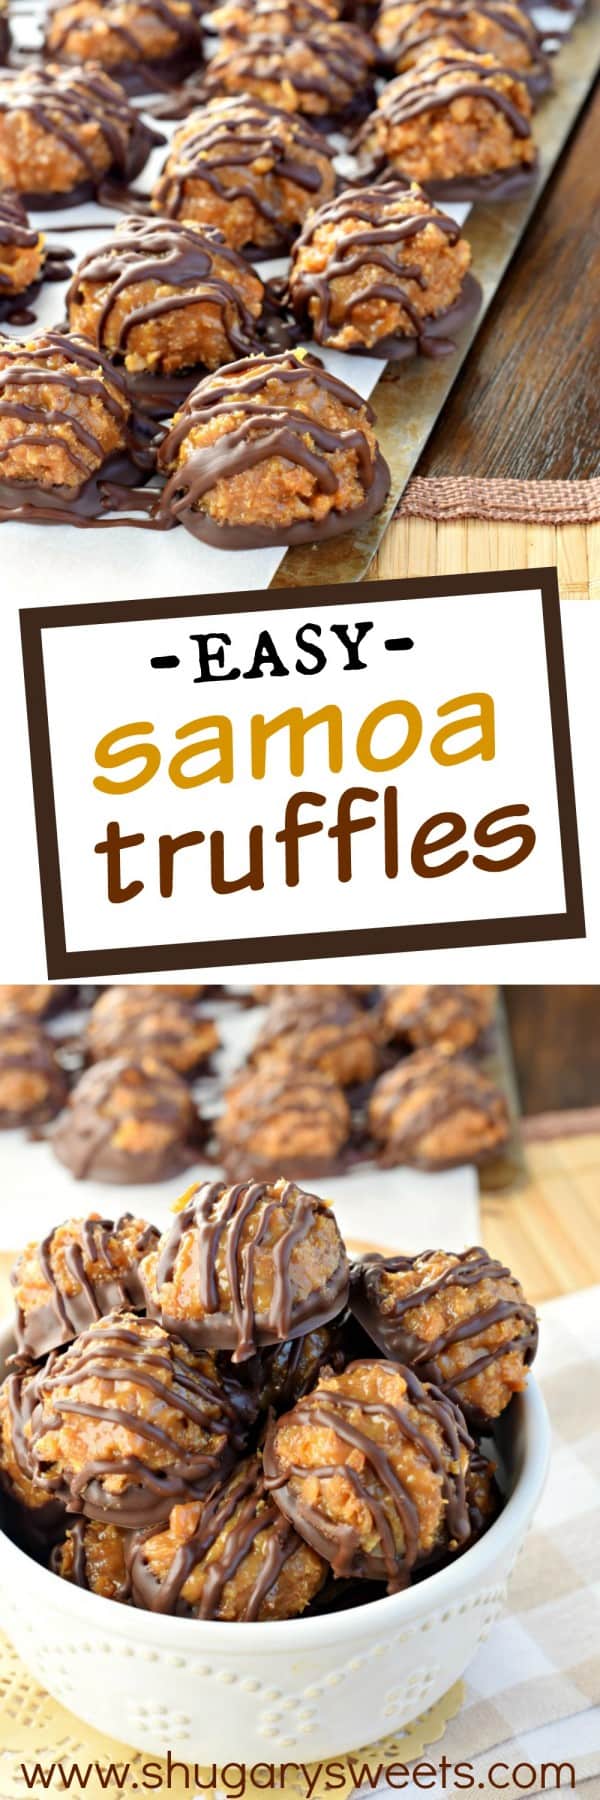 If you love Caramel deLites or Samoa Girl Scout Cookies, then these easy Samoa Truffles are going to drive your taste buds crazy!